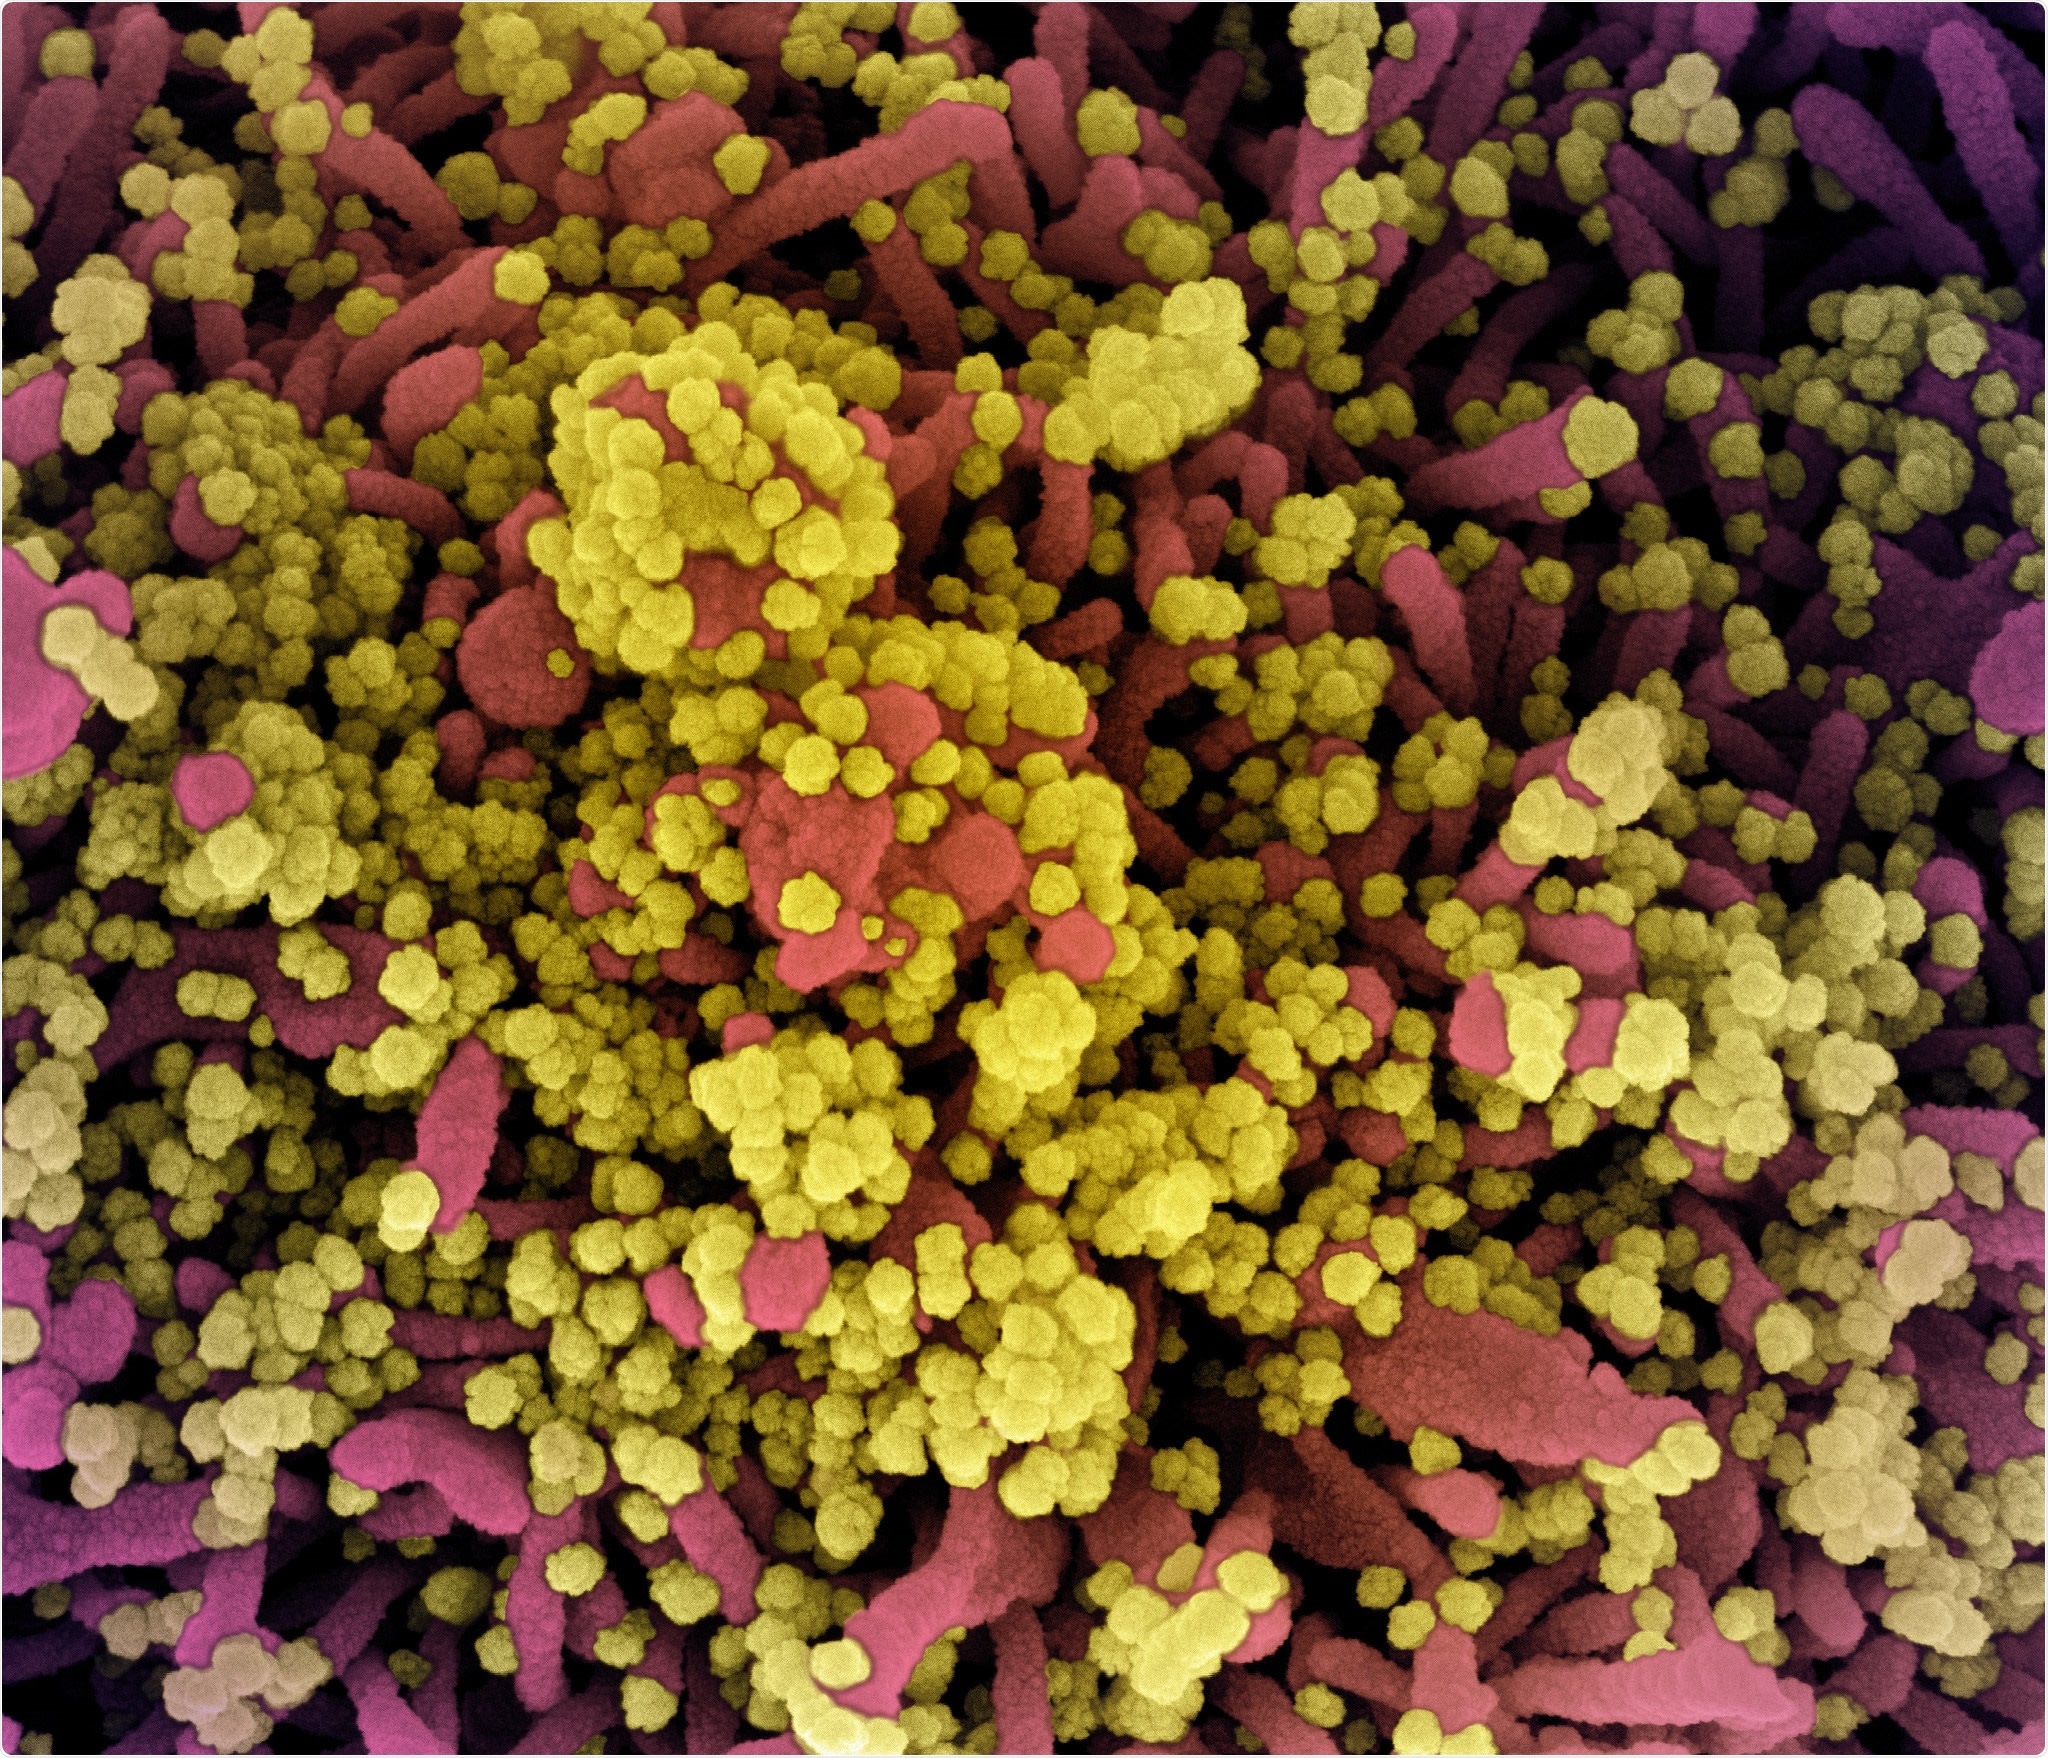 Colorized scanning electron micrograph of a cell heavily infected with SARS-CoV-2 virus particles (yellow), isolated from a patient sample. Image captured at the NIAID Integrated Research Facility (IRF) in Fort Detrick, Maryland. Credit: NIAID